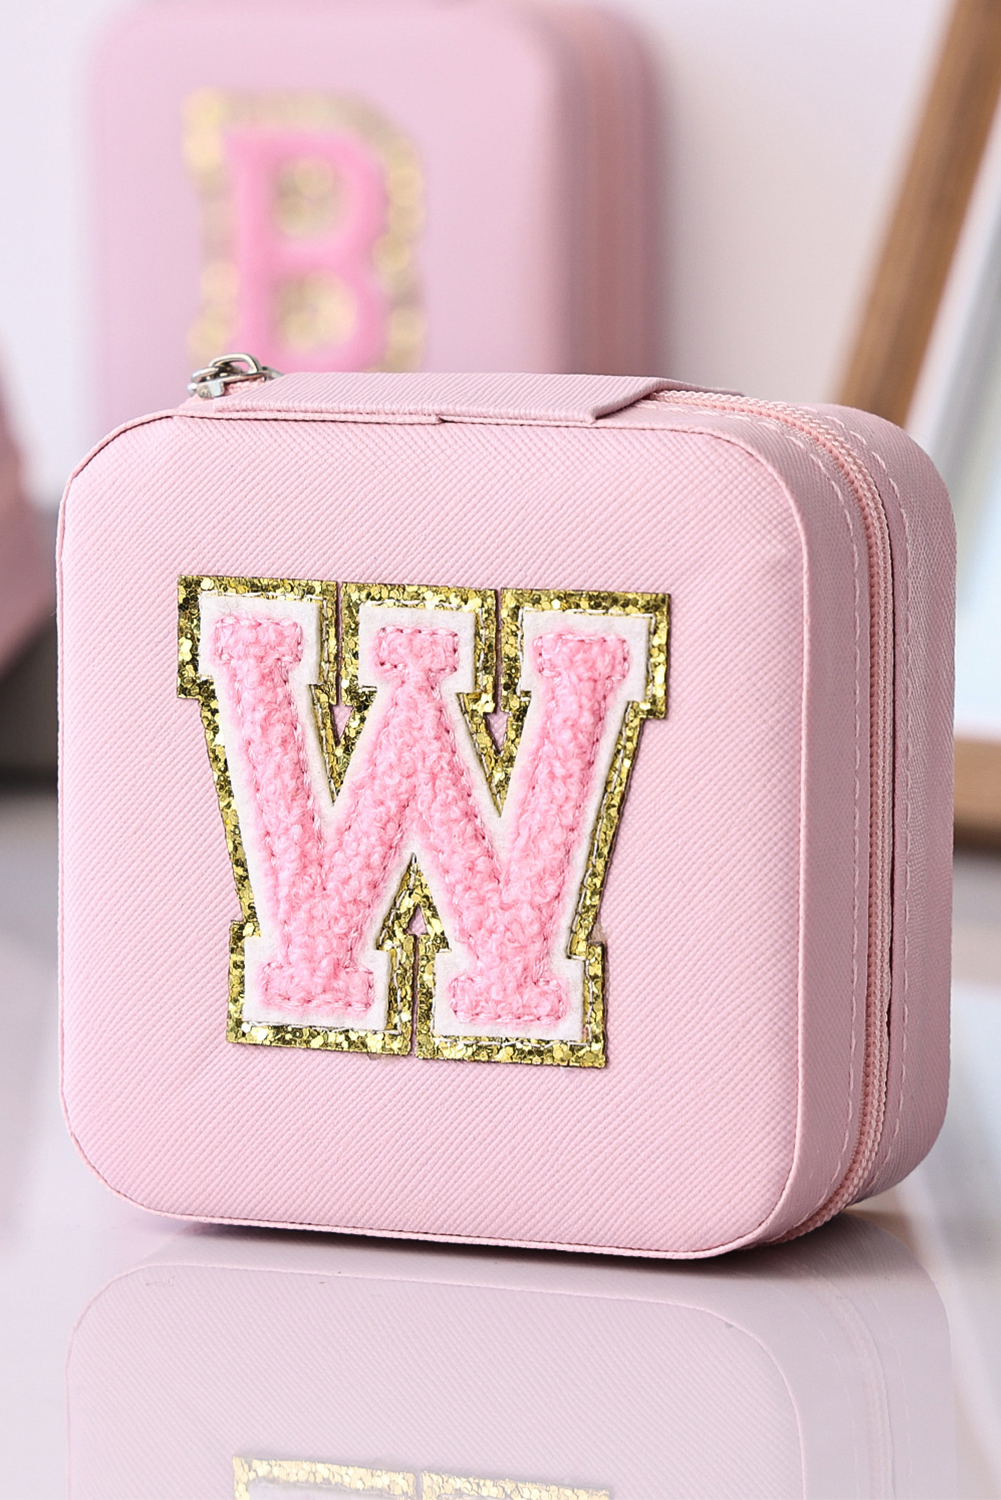 Shewin Wholesale Distributor Pink Glitter Chenille Letter W JEWELRY Box with Mirror